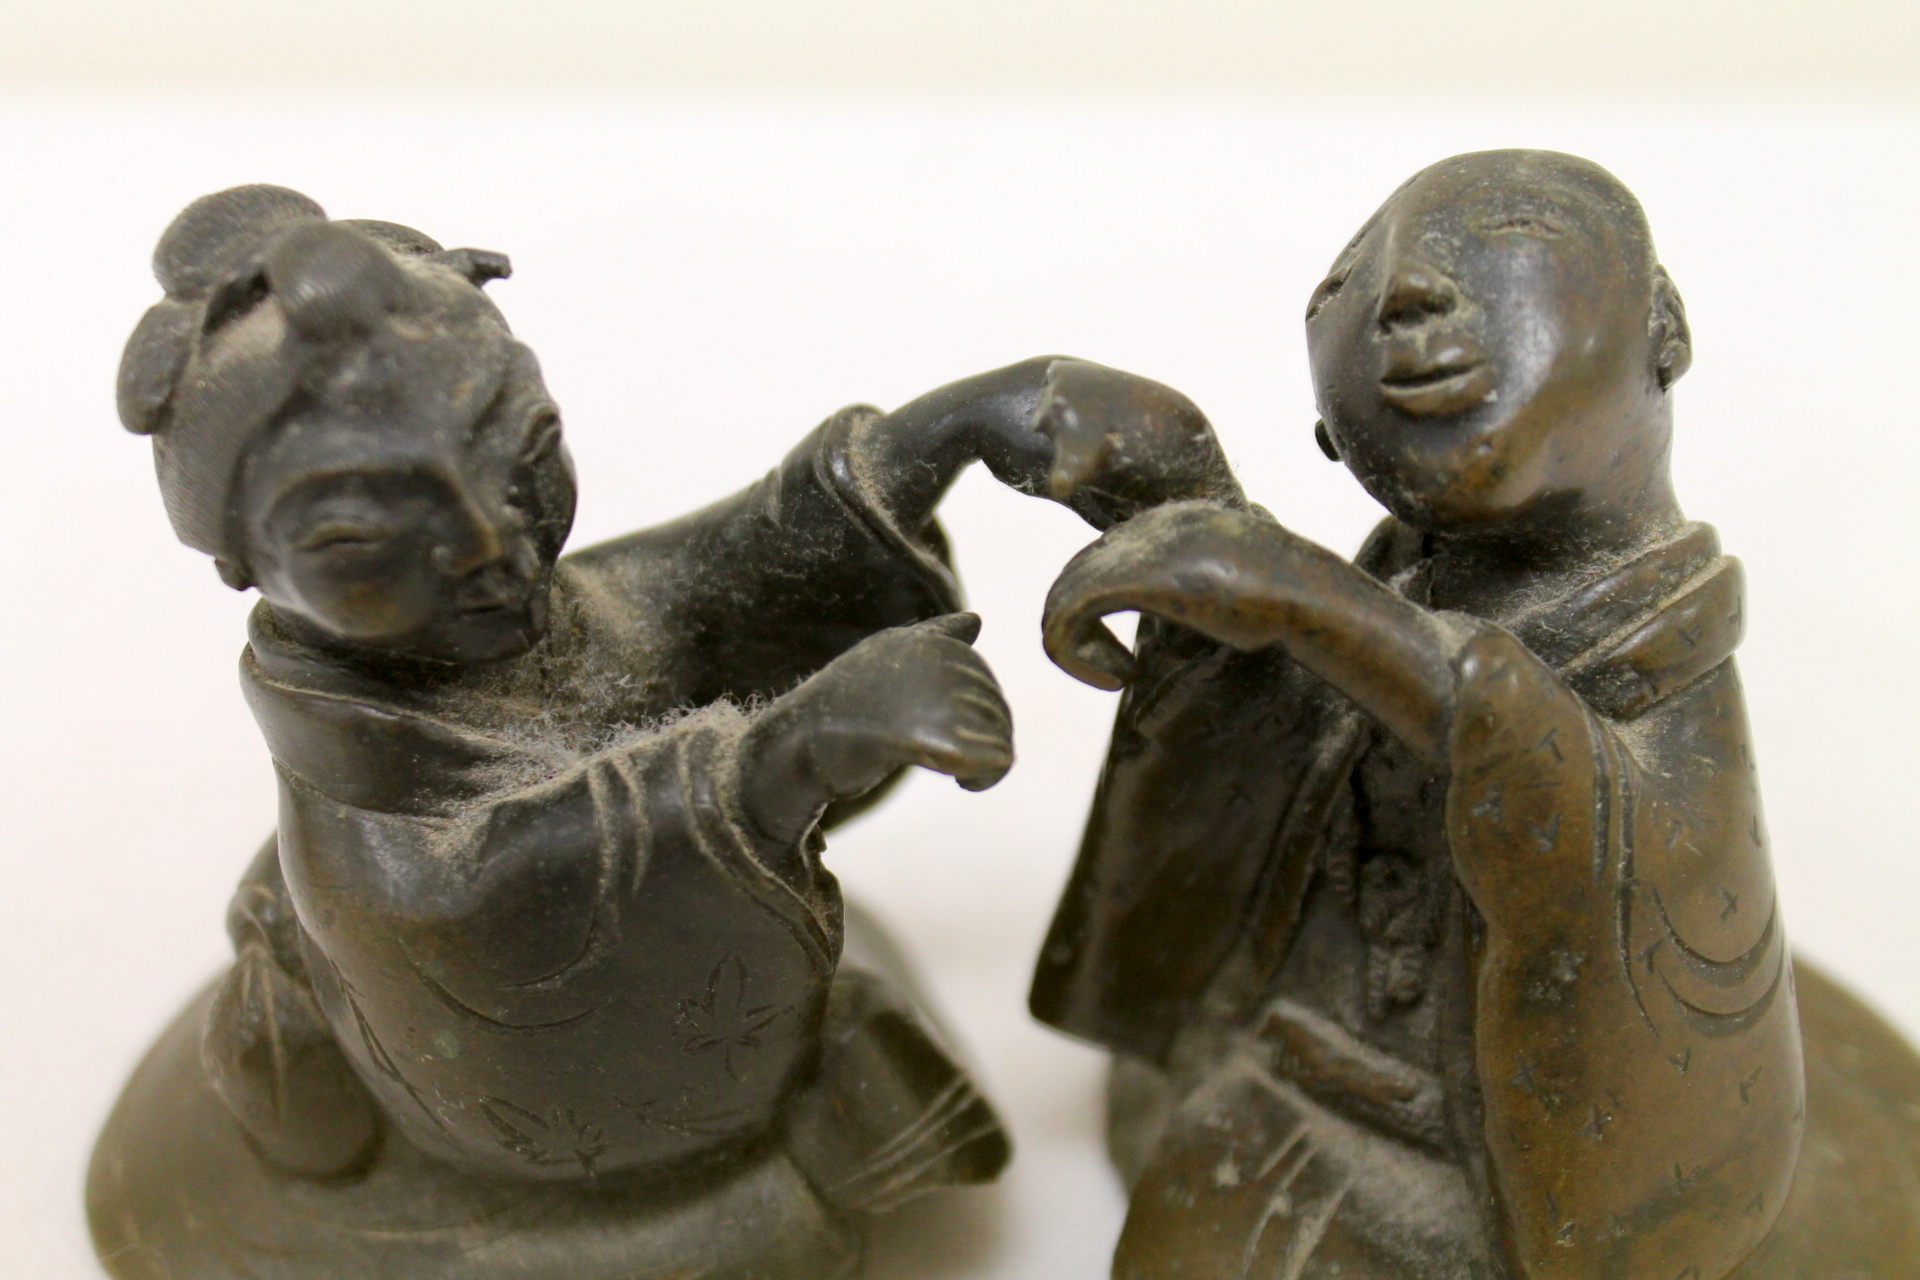 Pair of Meiji period Japanese bronze figures of a geisha and her companion, - Image 4 of 5